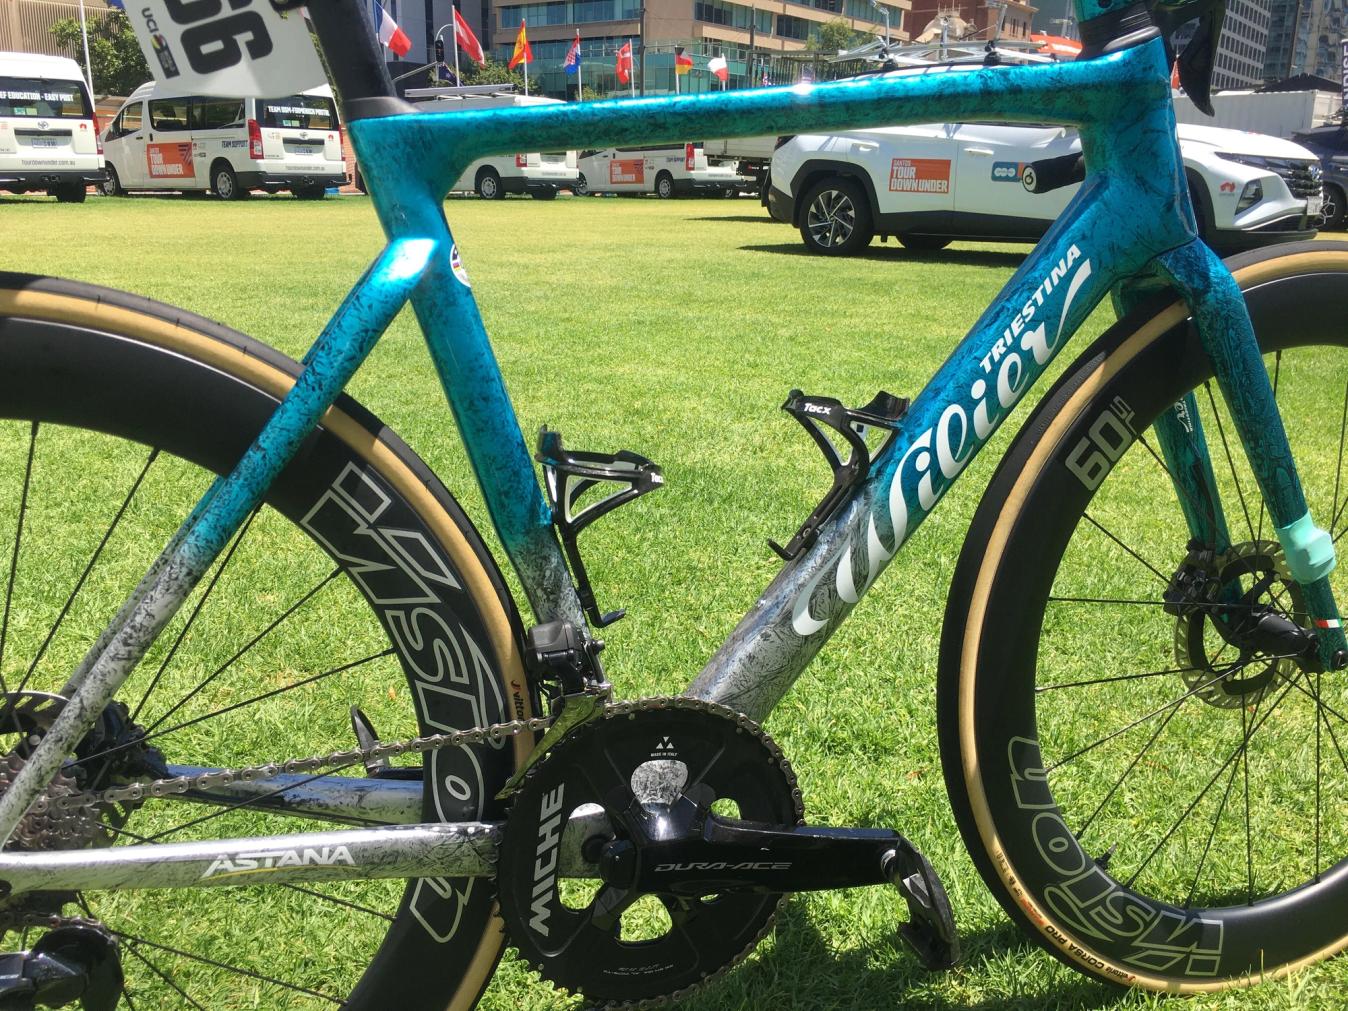 Astana's Wilier Filante has an eye-catching colourway